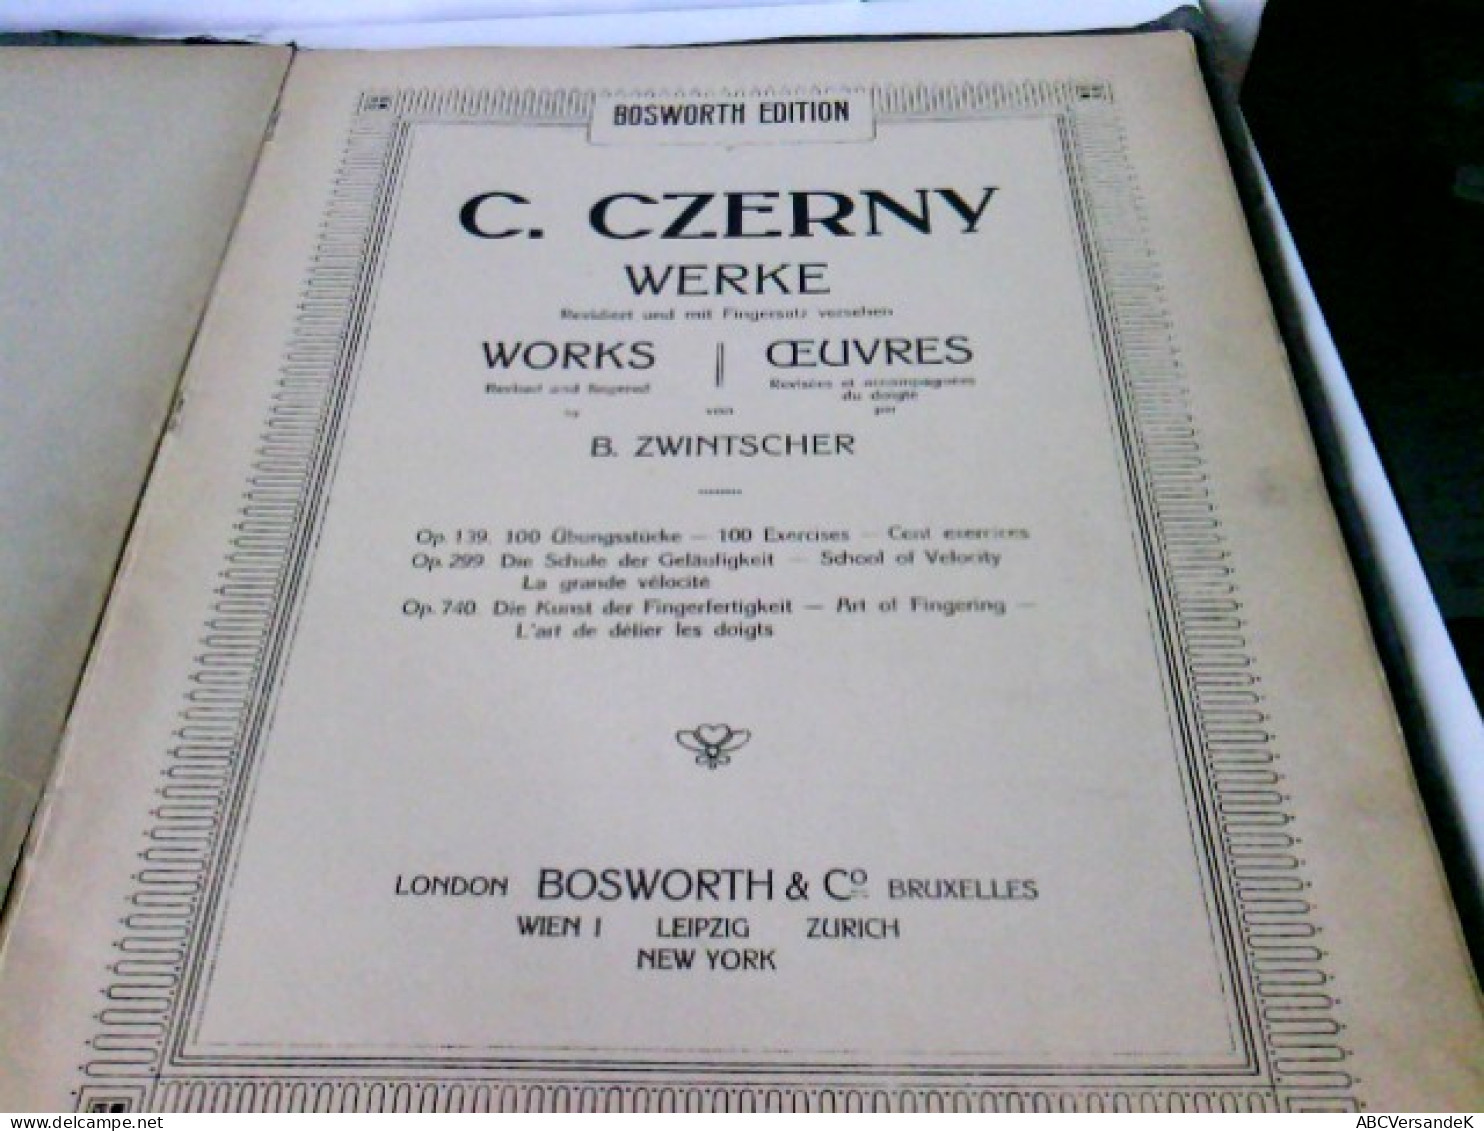 Opus 139. 100 Uebungsstücke - 100 Exercises - Cent Exercices: Bosworth Edition (B & Co. 892. 2392/3) - Musique